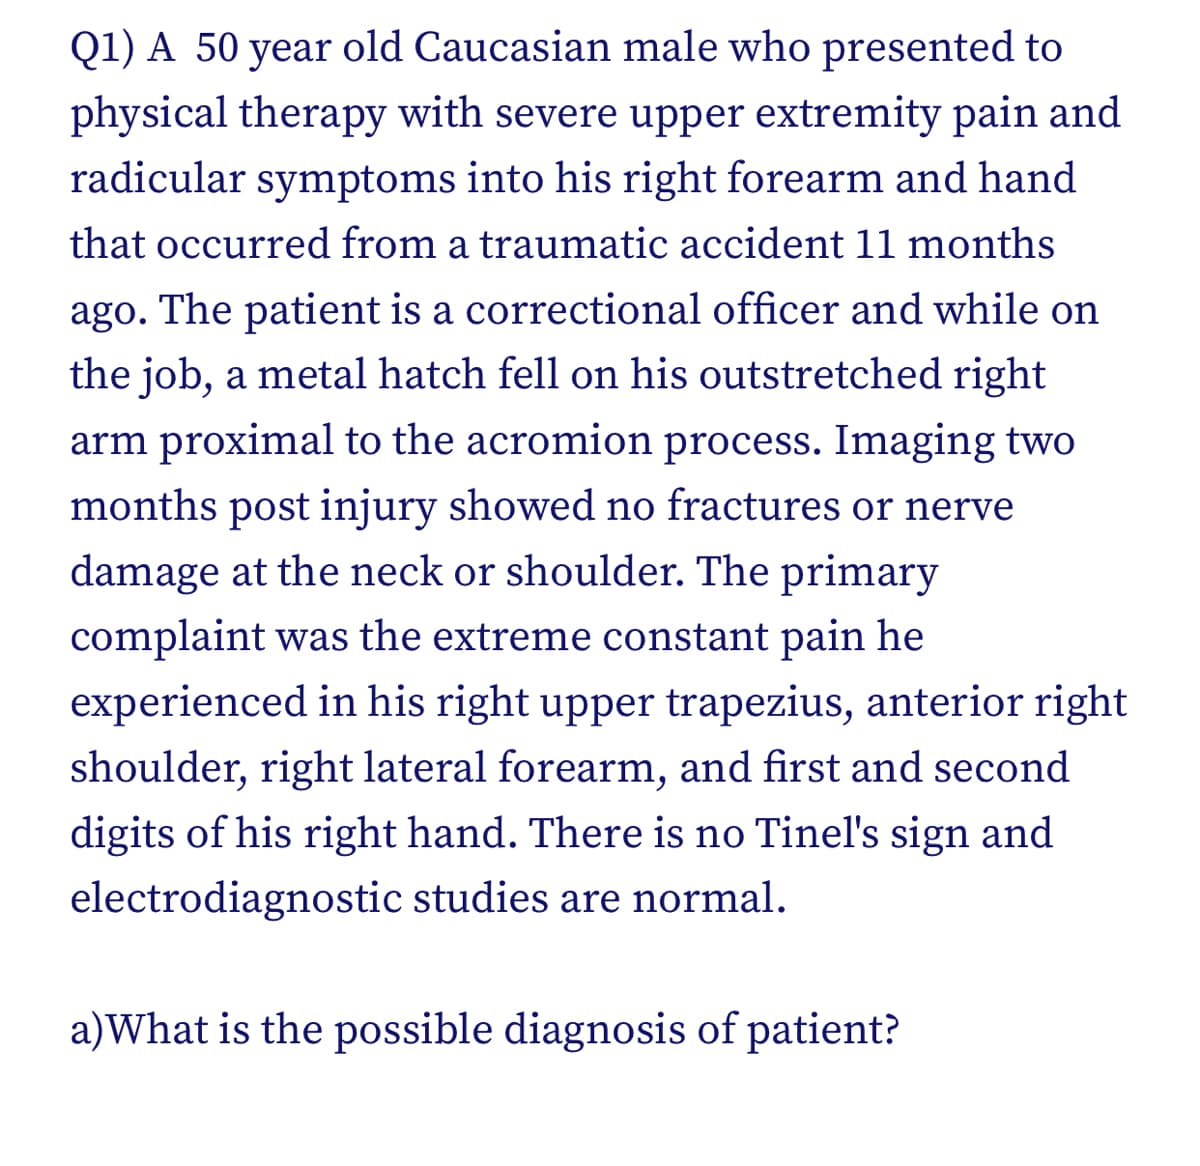 Q1) A 50 year old Caucasian male who presented to
physical therapy with severe upper extremity pain and
radicular symptoms into his right forearm and hand
that occurred from a traumatic accident 11 months
ago. The patient is a correctional officer and while on
the job, a metal hatch fell on his outstretched right
arm proximal to the acromion process. Imaging two
months post injury showed no fractures or nerve
damage at the neck or shoulder. The primary
complaint was the extreme constant pain he
experienced in his right upper trapezius, anterior right
shoulder, right lateral forearm, and first and second
digits of his right hand. There is no Tinel's sign and
electrodiagnostic studies are normal.
a)What is the possible diagnosis of patient?
